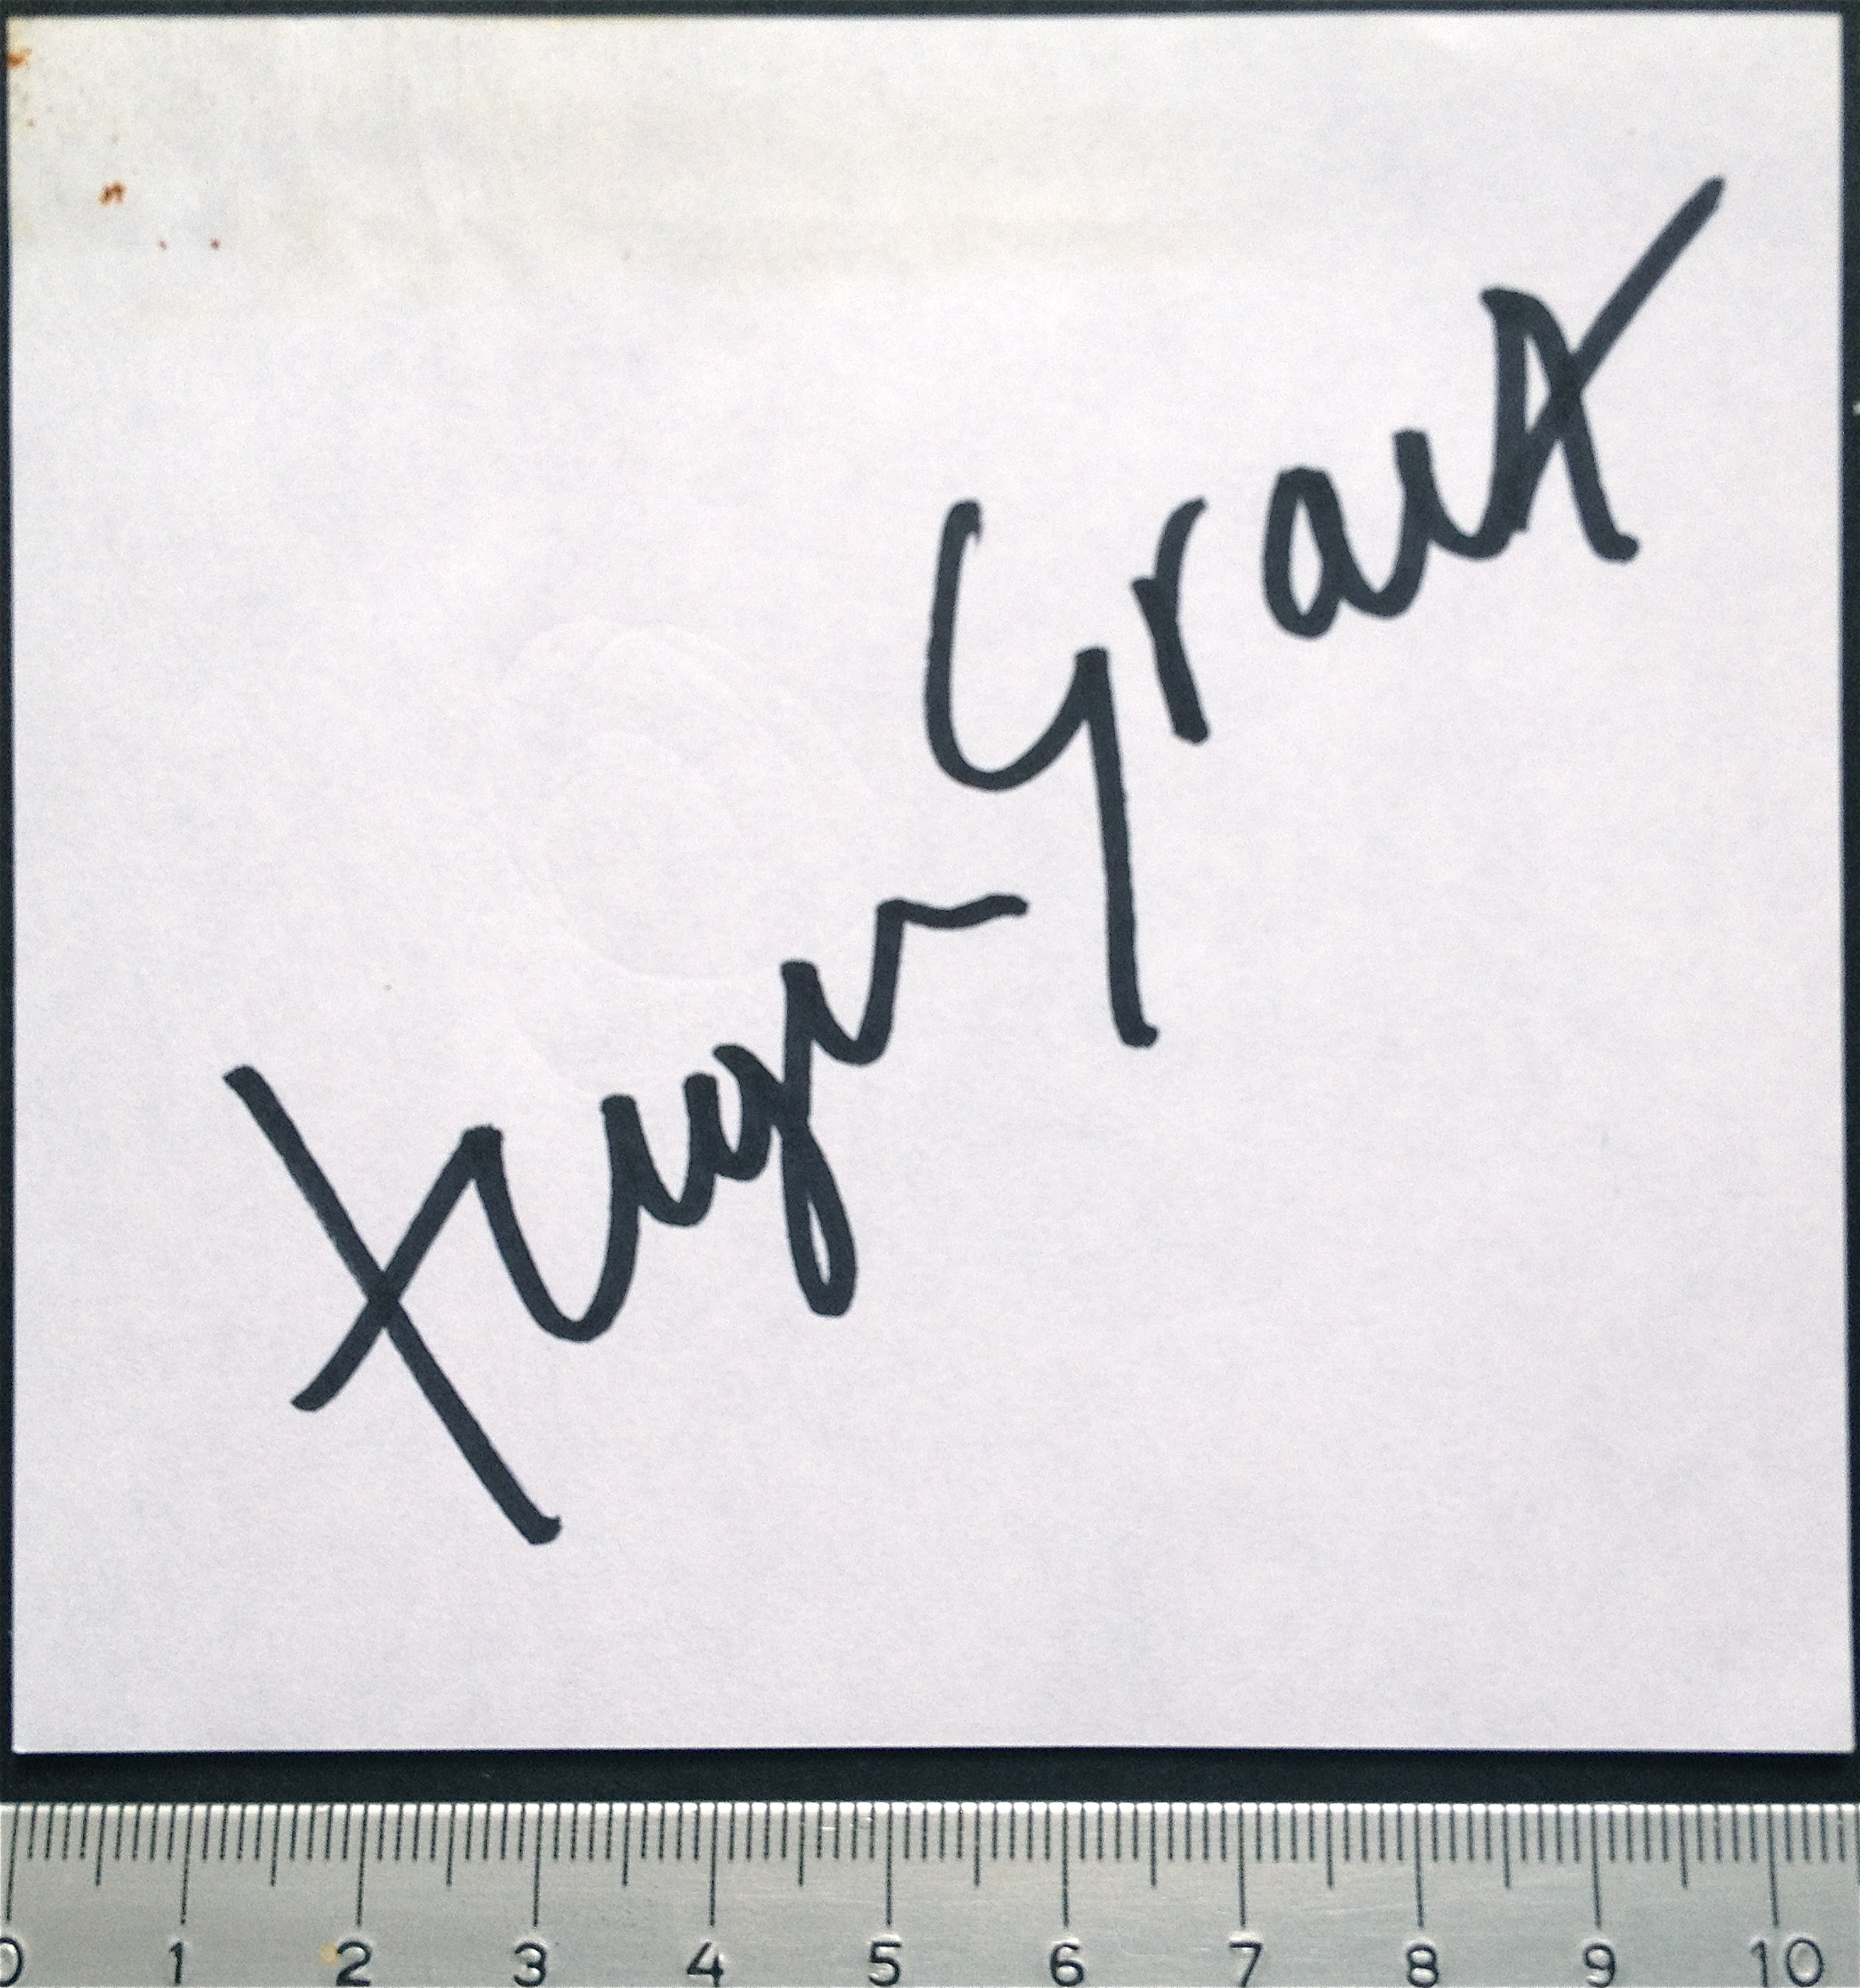 HUGH GRANT  - Real autograph on paper